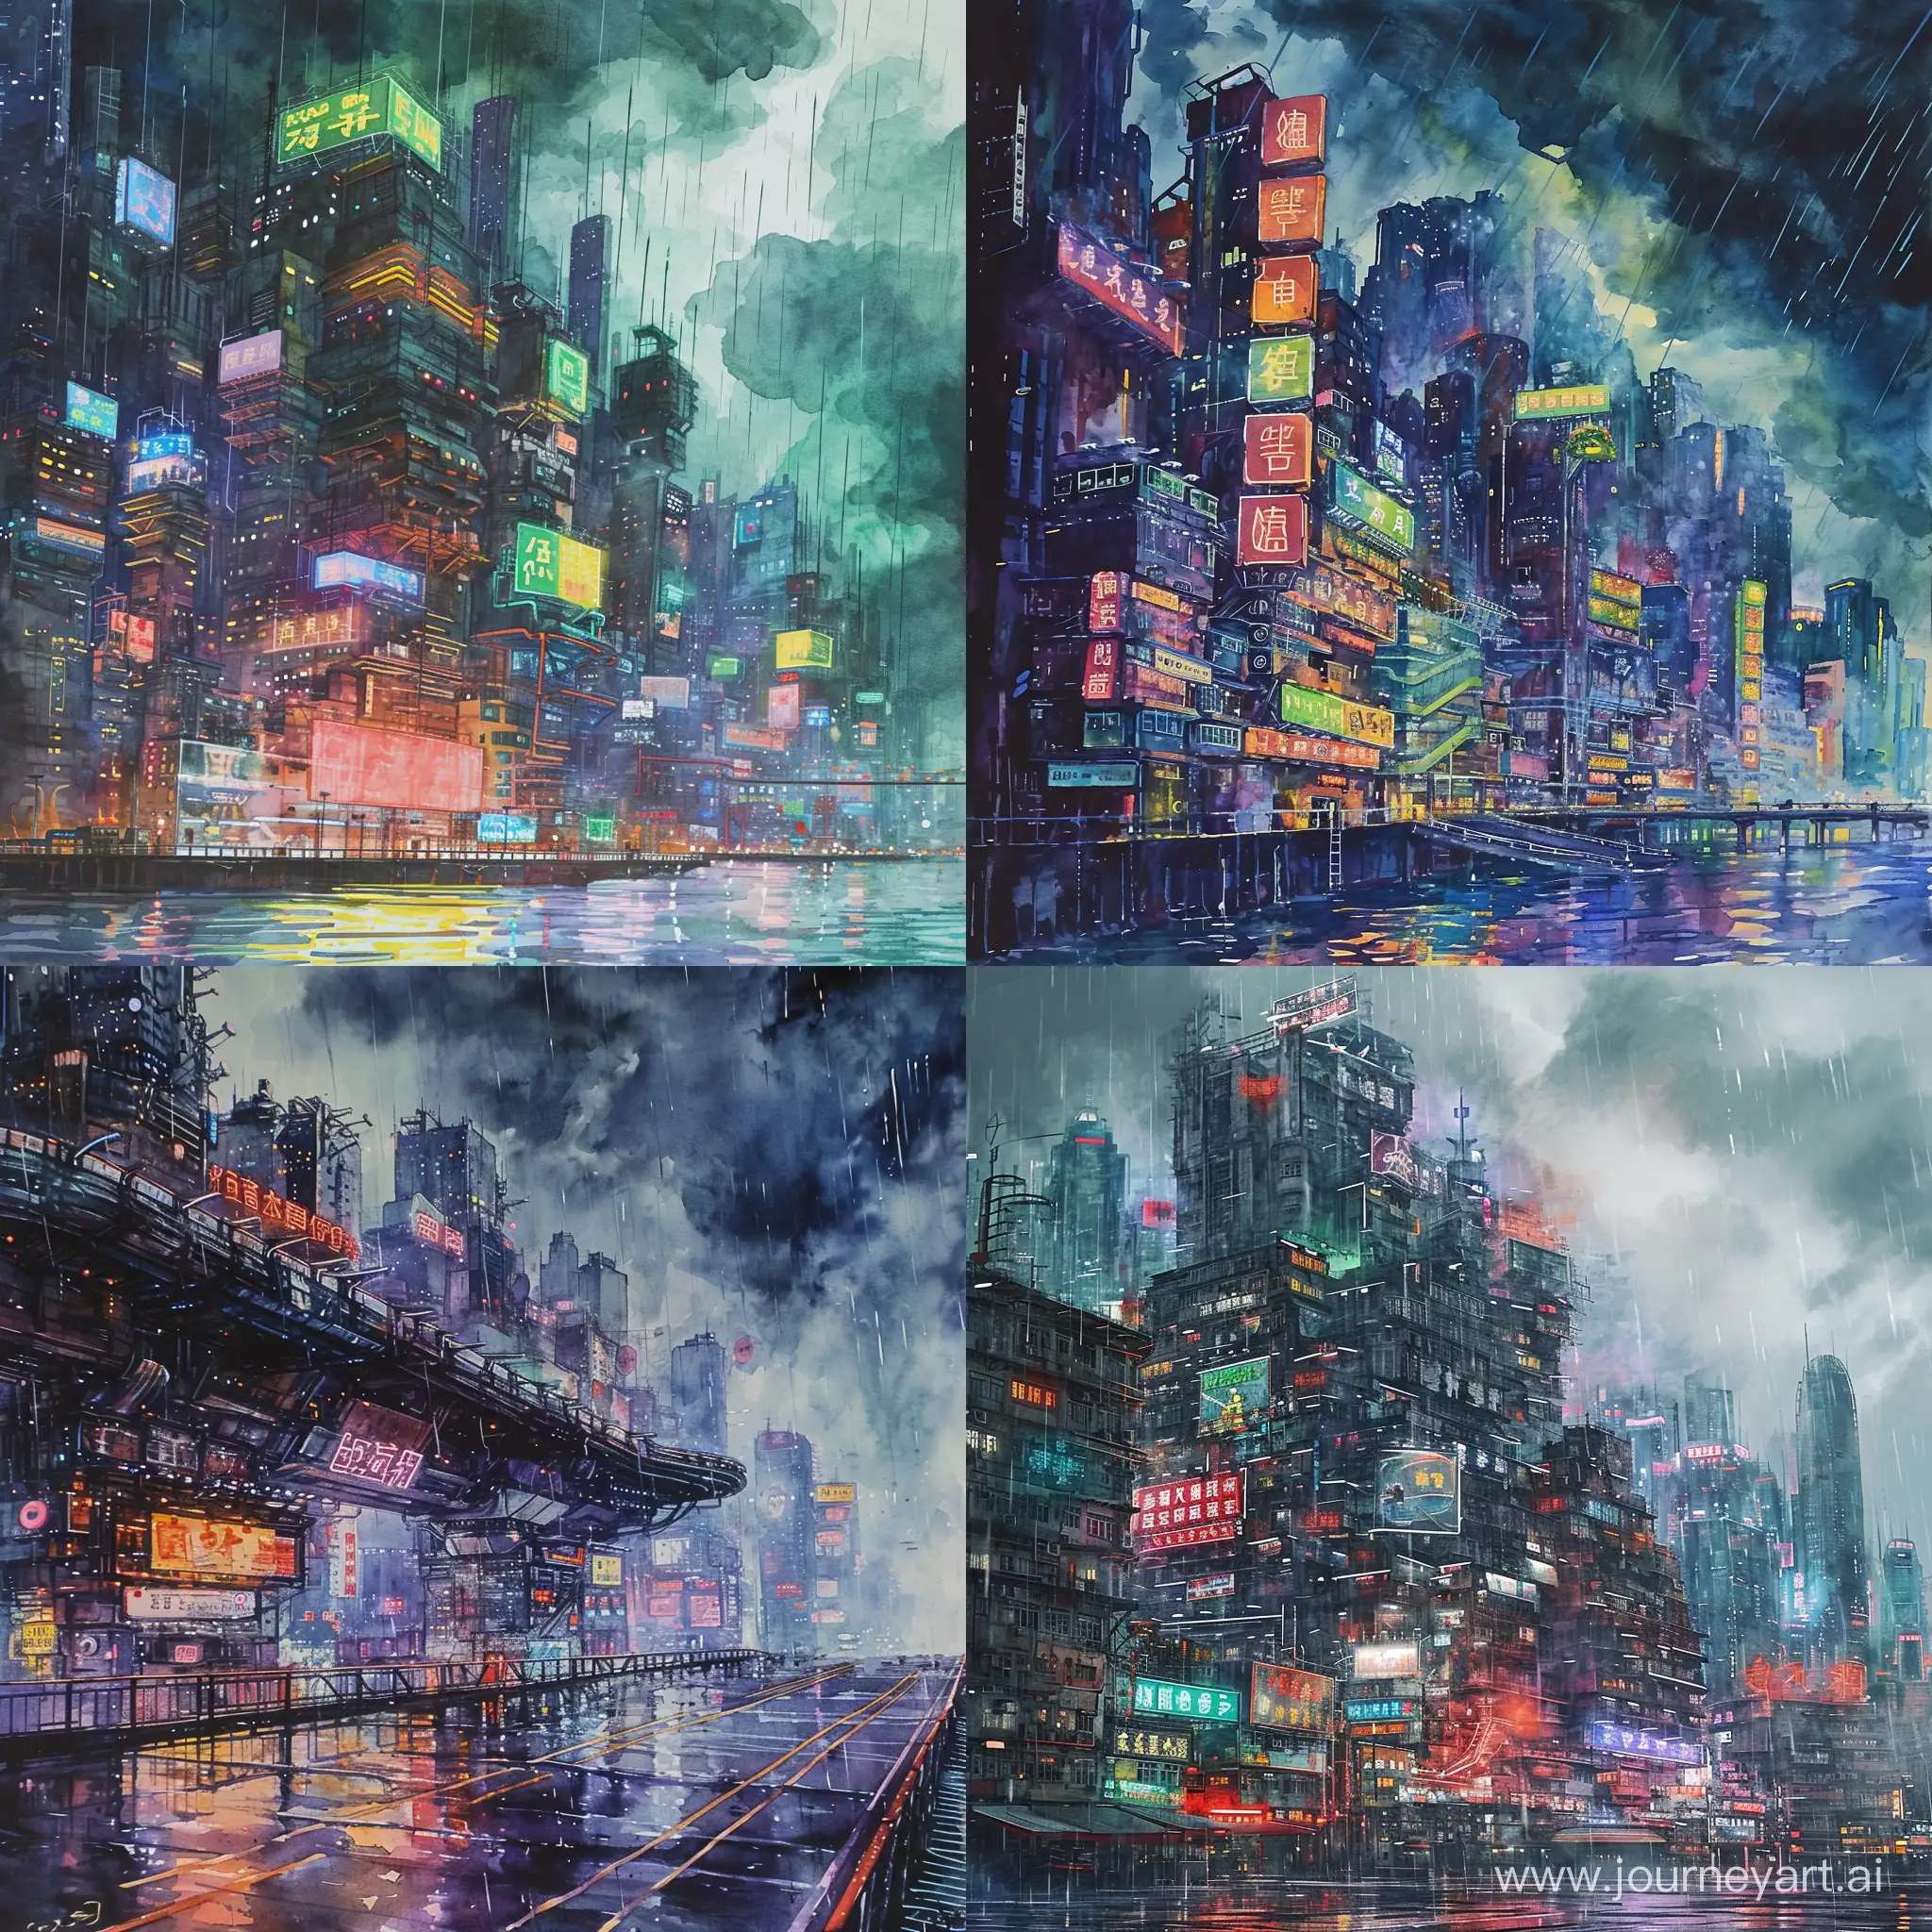 A massive neon kowloon walled futuristic cyberpunk city during a stormy day, watercolor